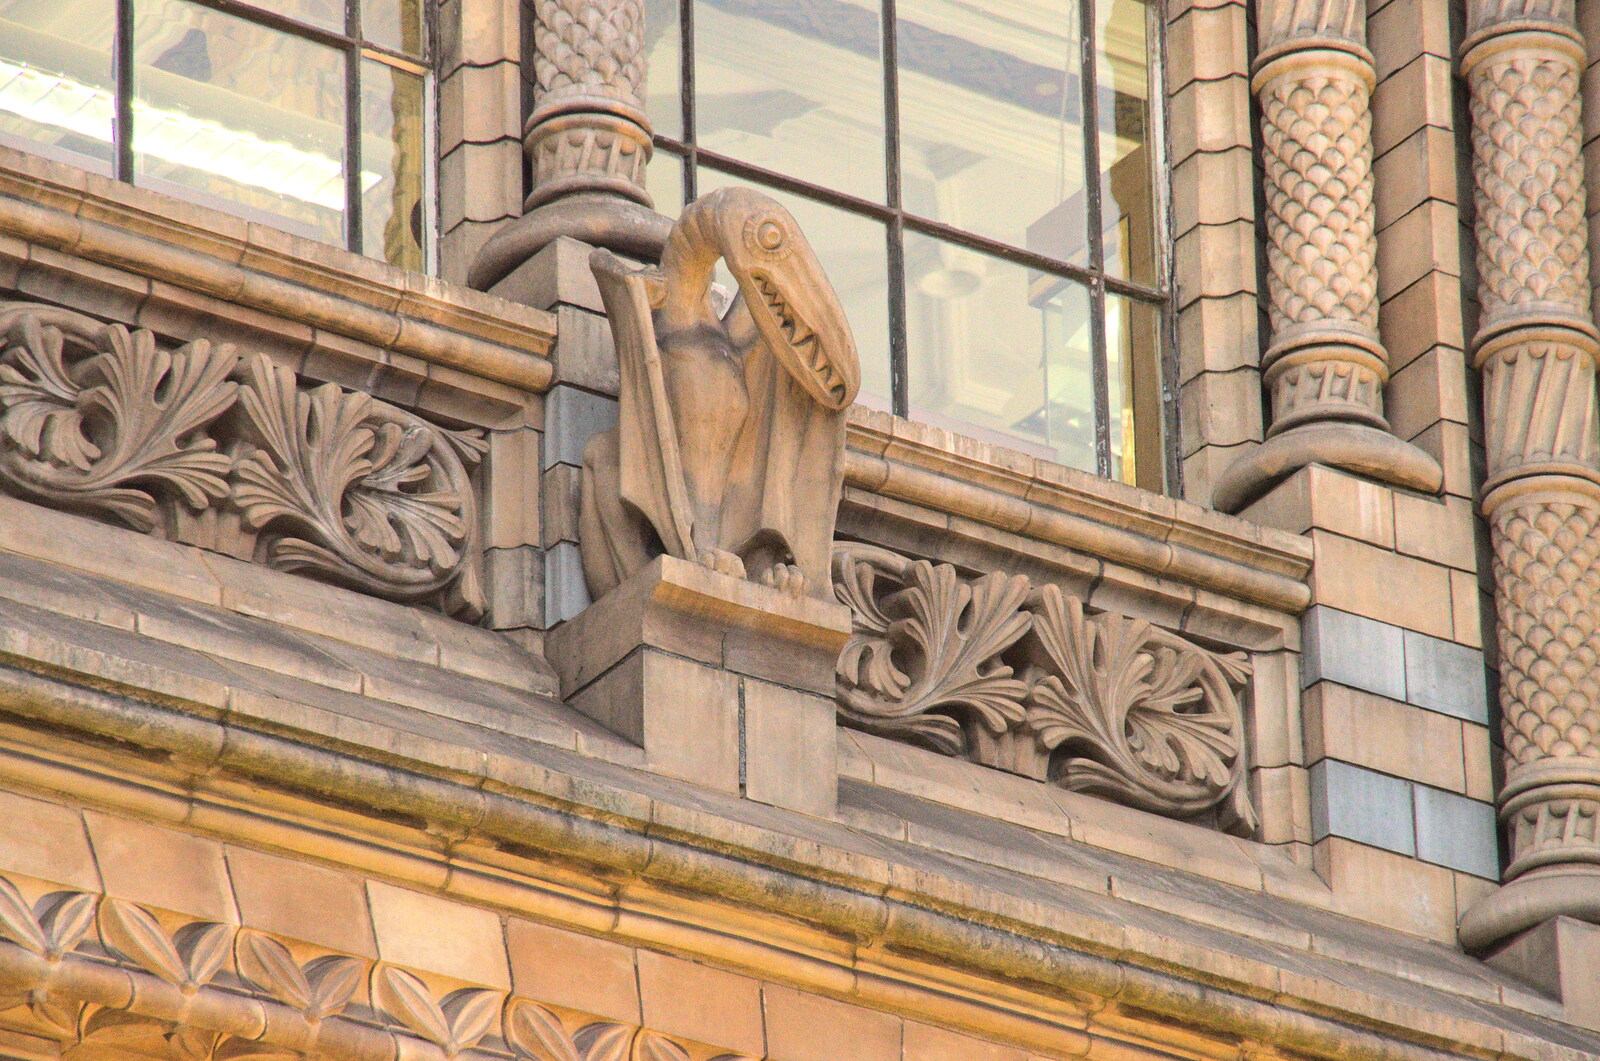 Curious gargoyles perch up on the building from A Trip to the Natural History Museum, Kensington, London - 15th January 2022